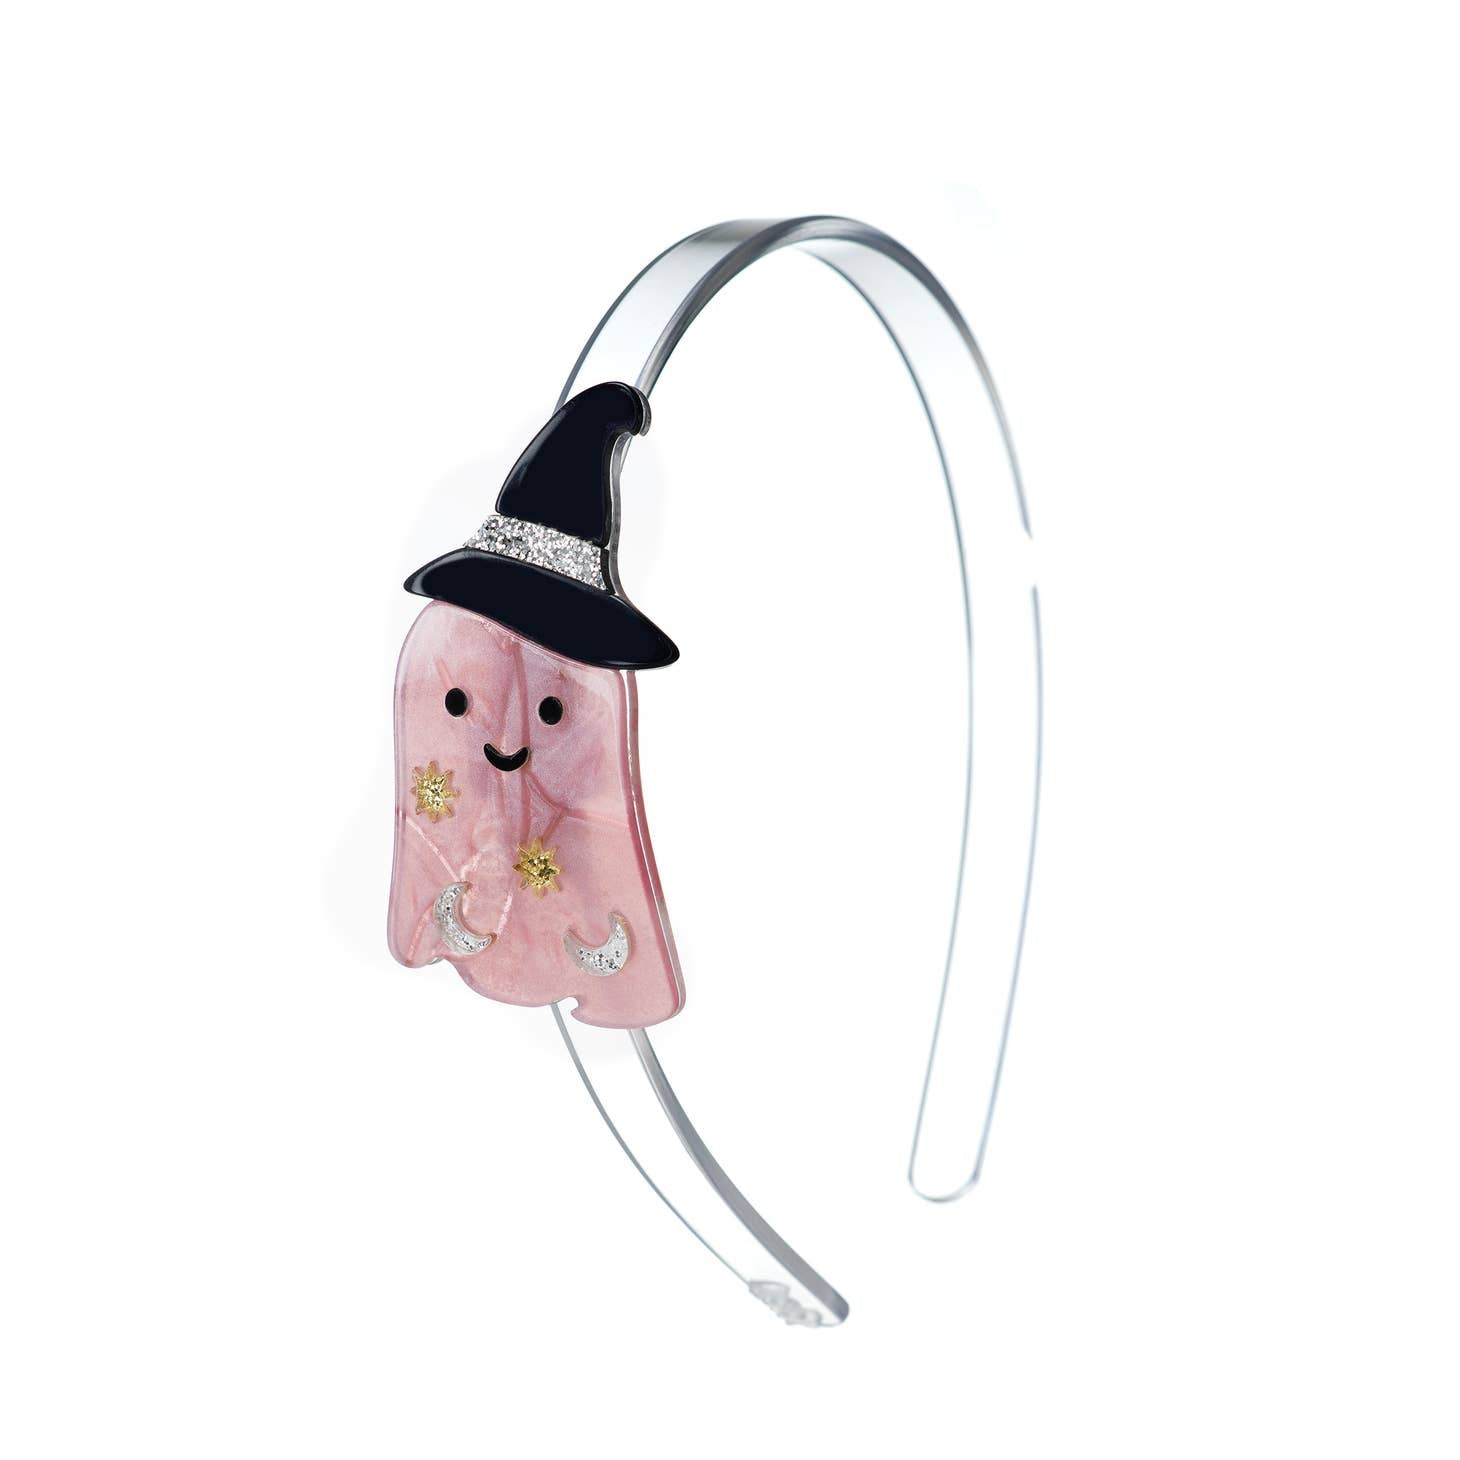 Ghost Witch Hat Pearlized Pink Acrylic Headband